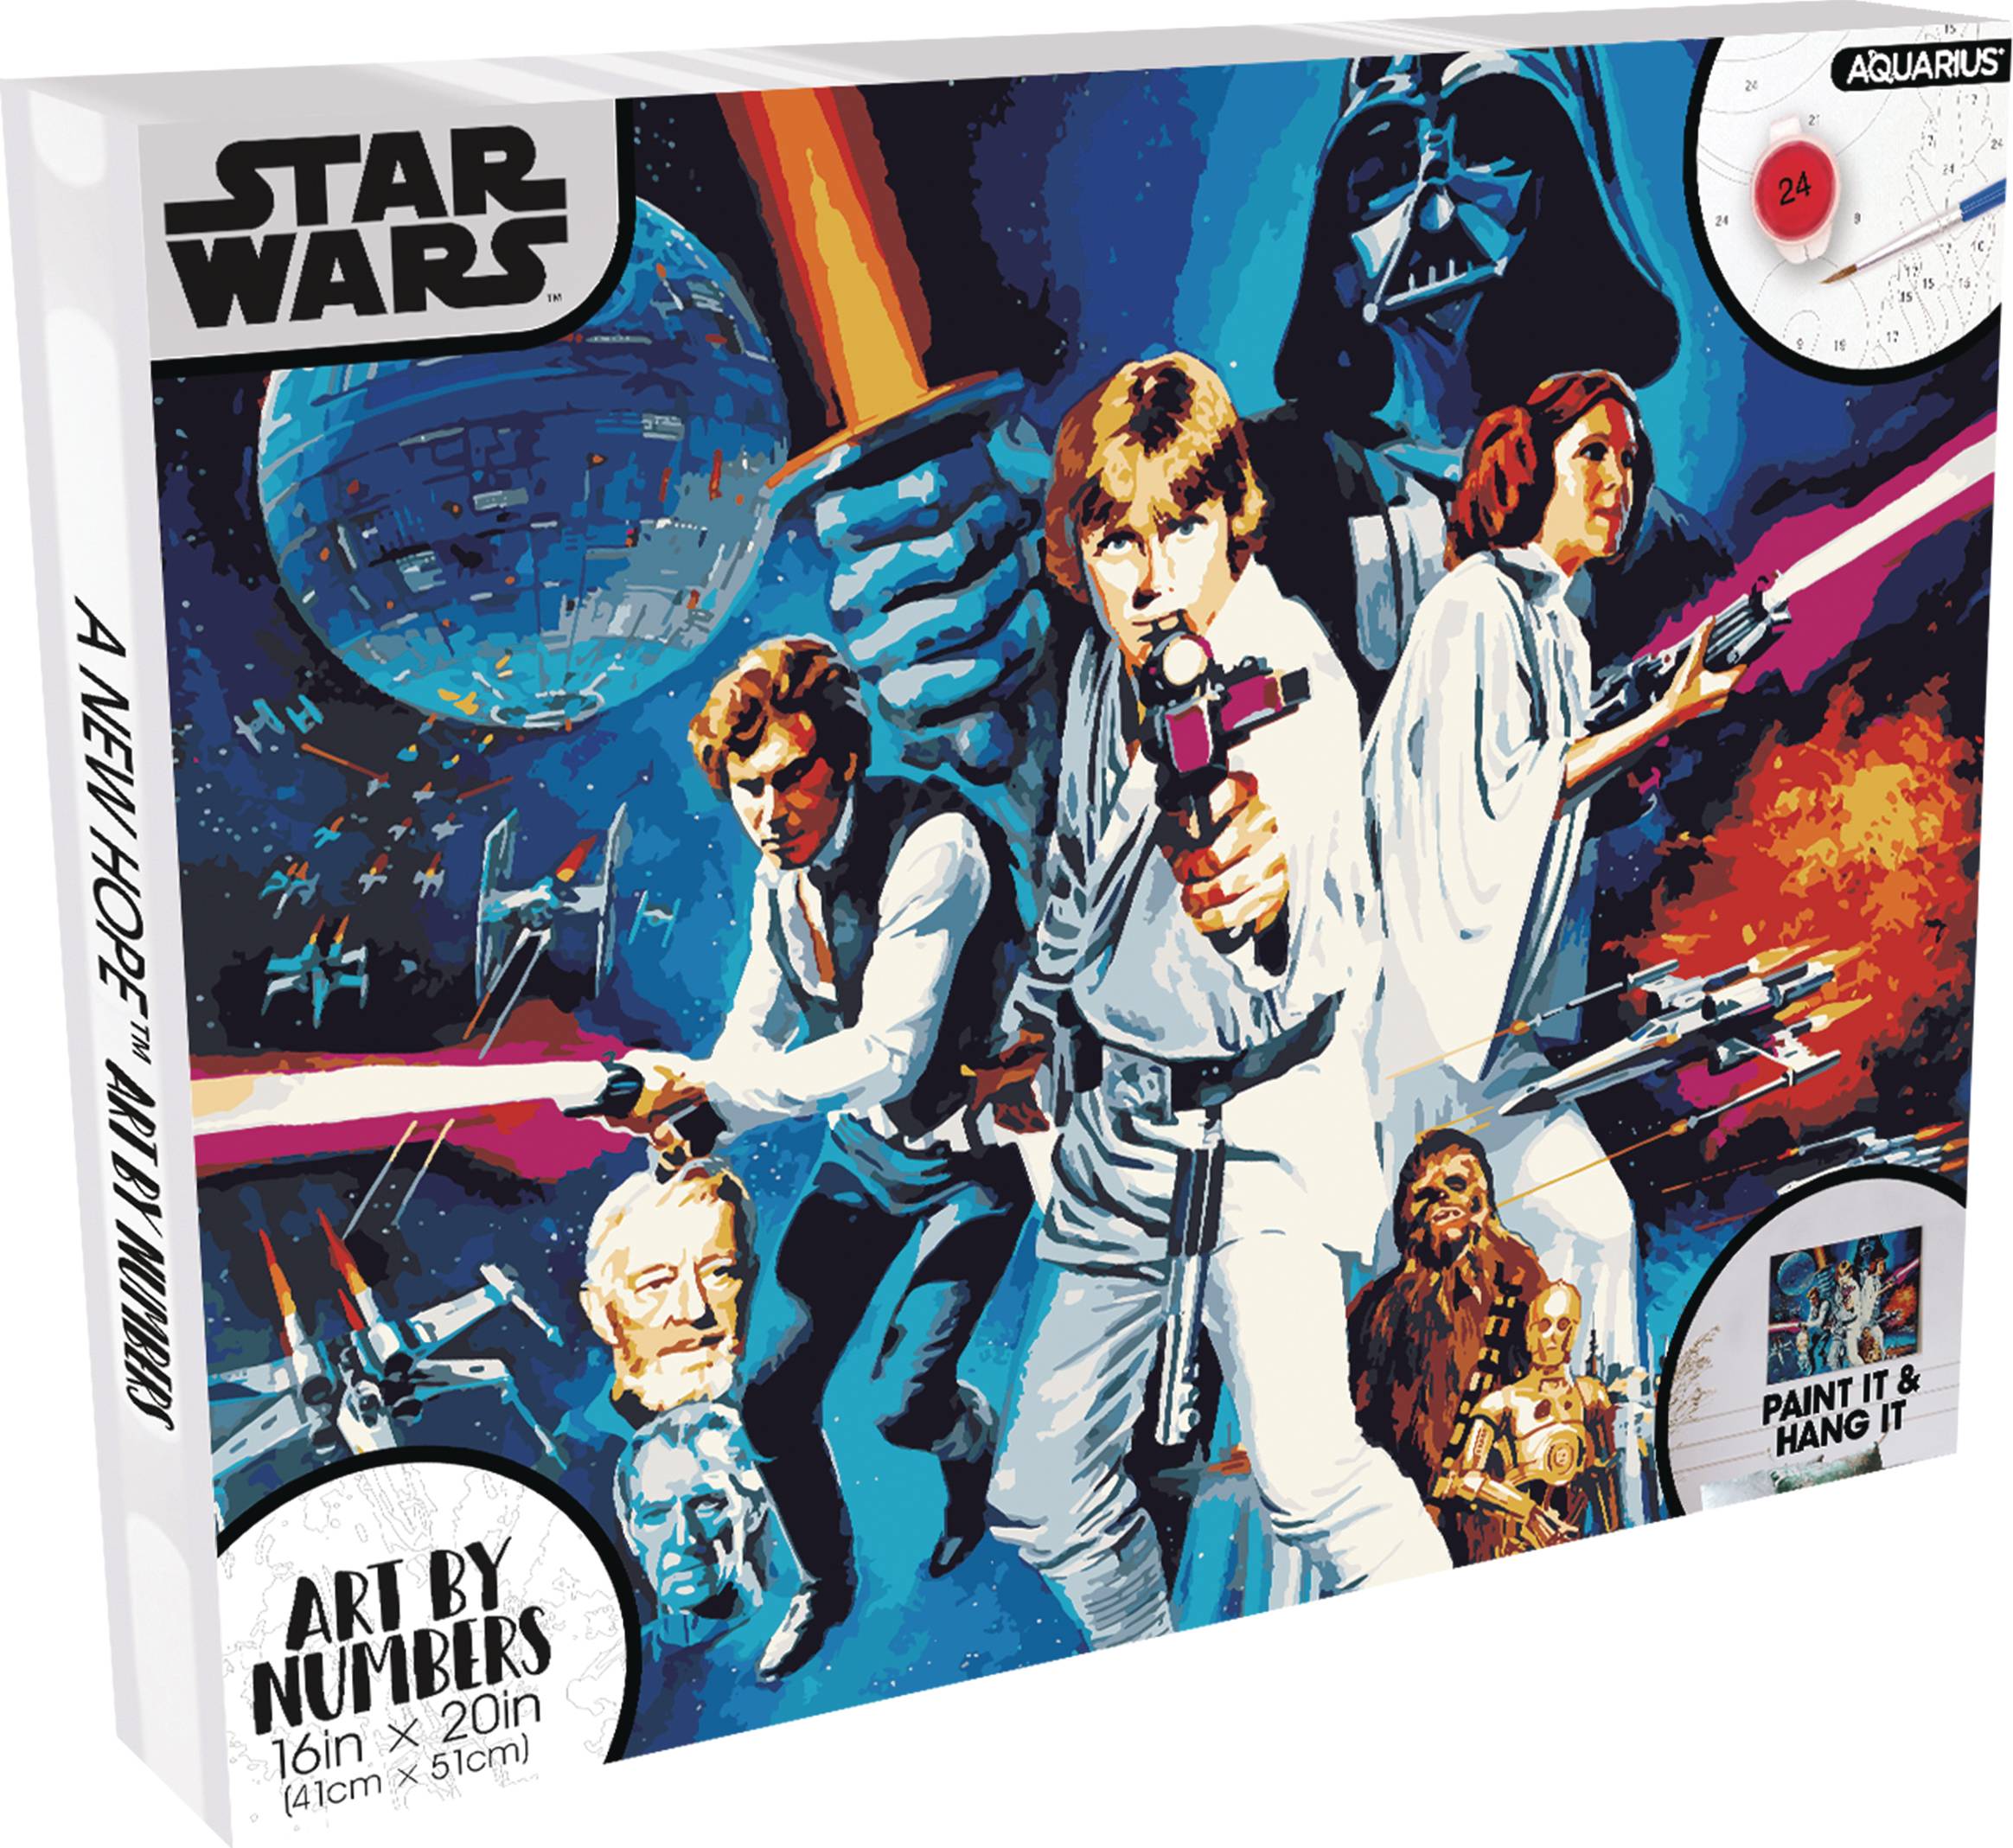 FEB238338 - STAR WARS EPISODE 4 ART BY NUMBERS PAINTING KIT - Previews World